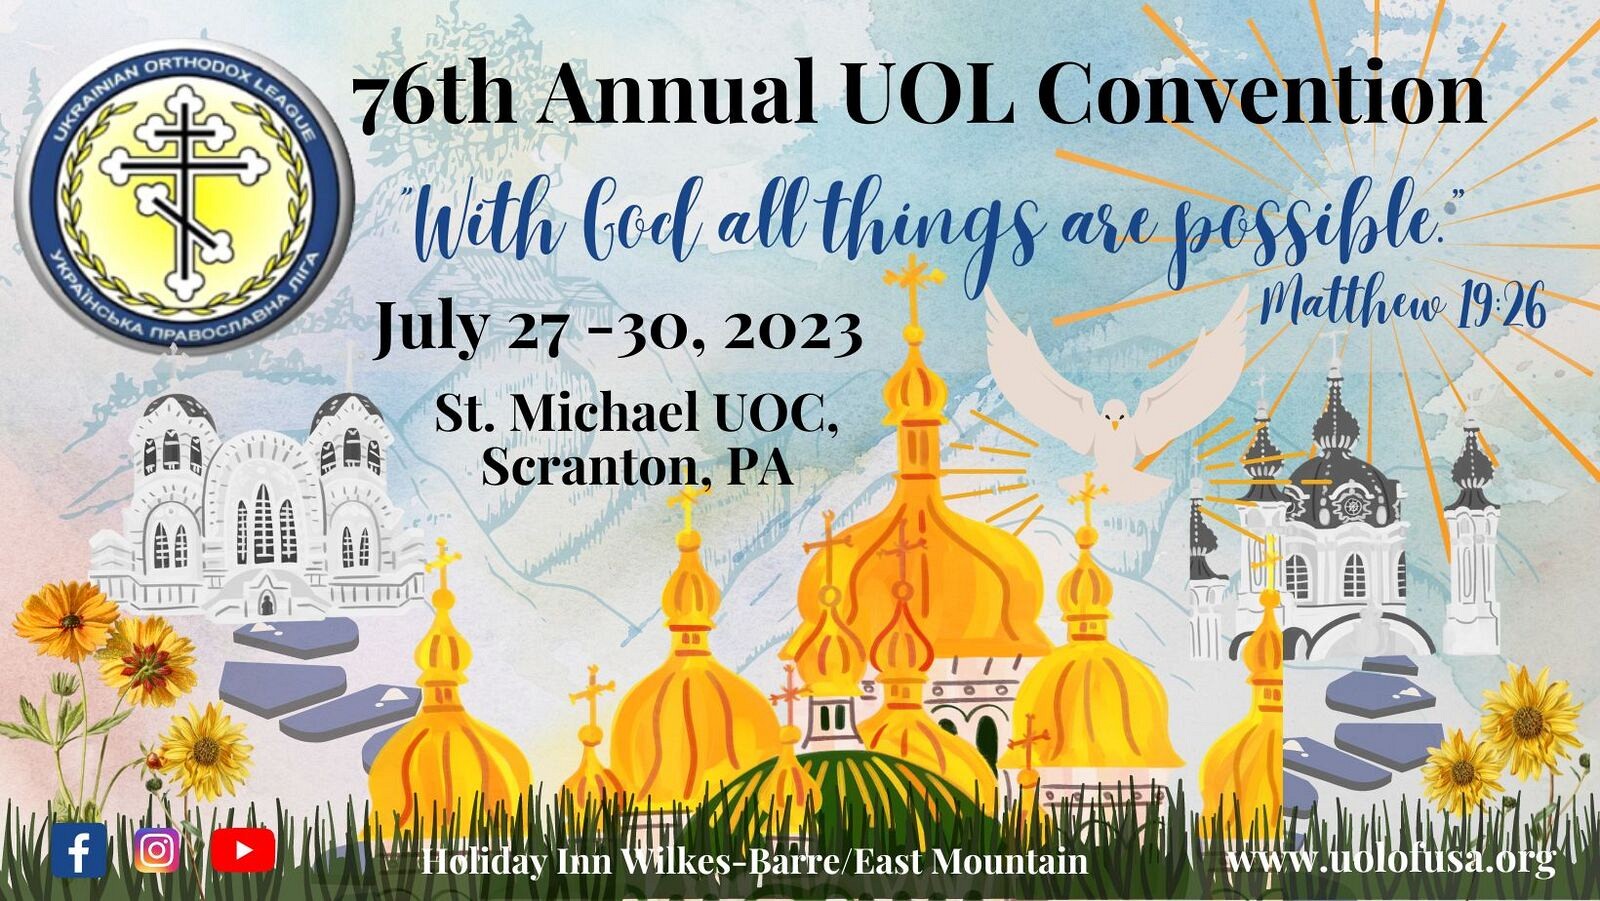 CLICK ON IMAGE FOR 76TH UOL CONVENTION